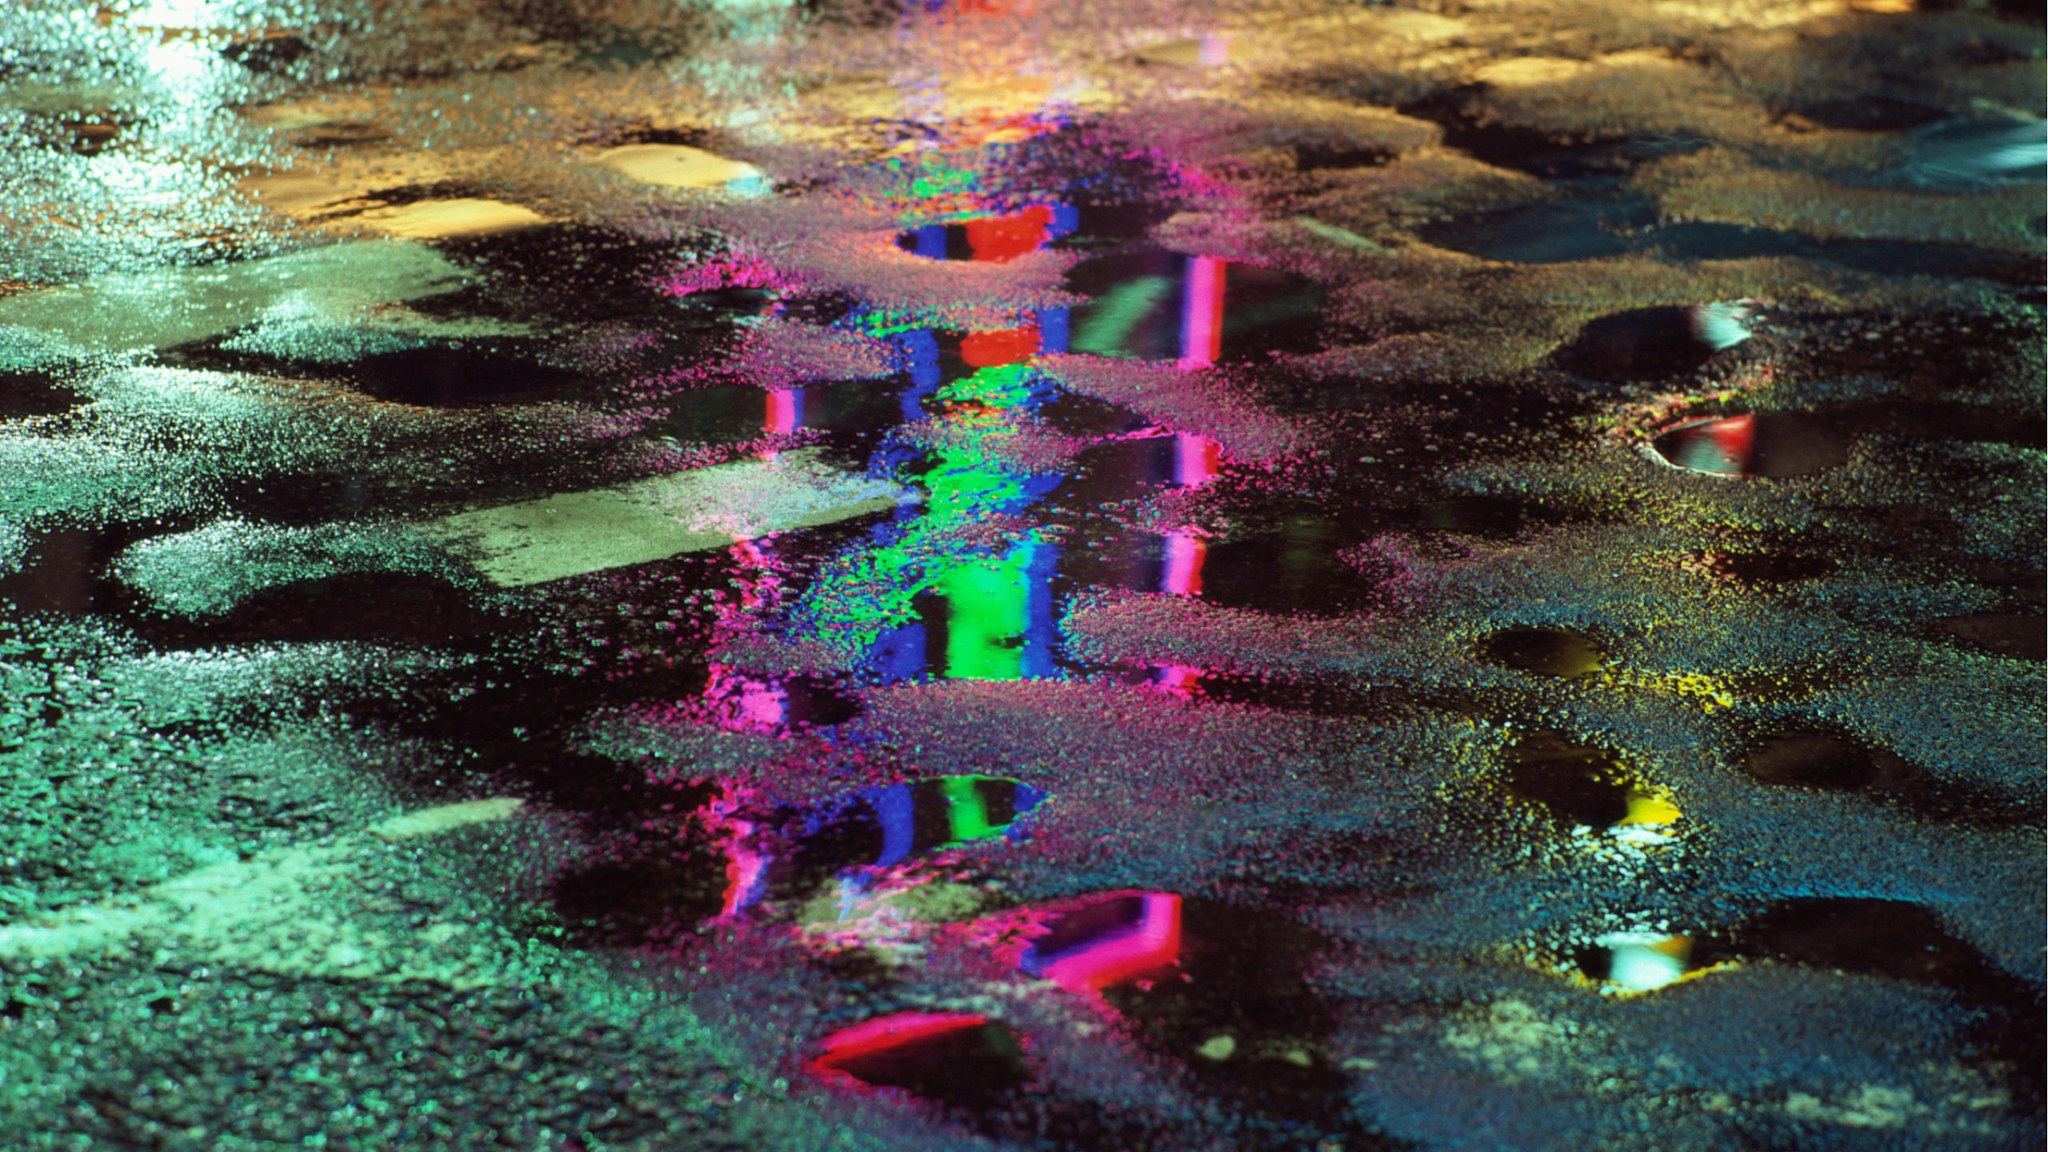 The bright lights of the Ginza district of Tokyo, reflected in a wet road surface, Japan, June 1984.